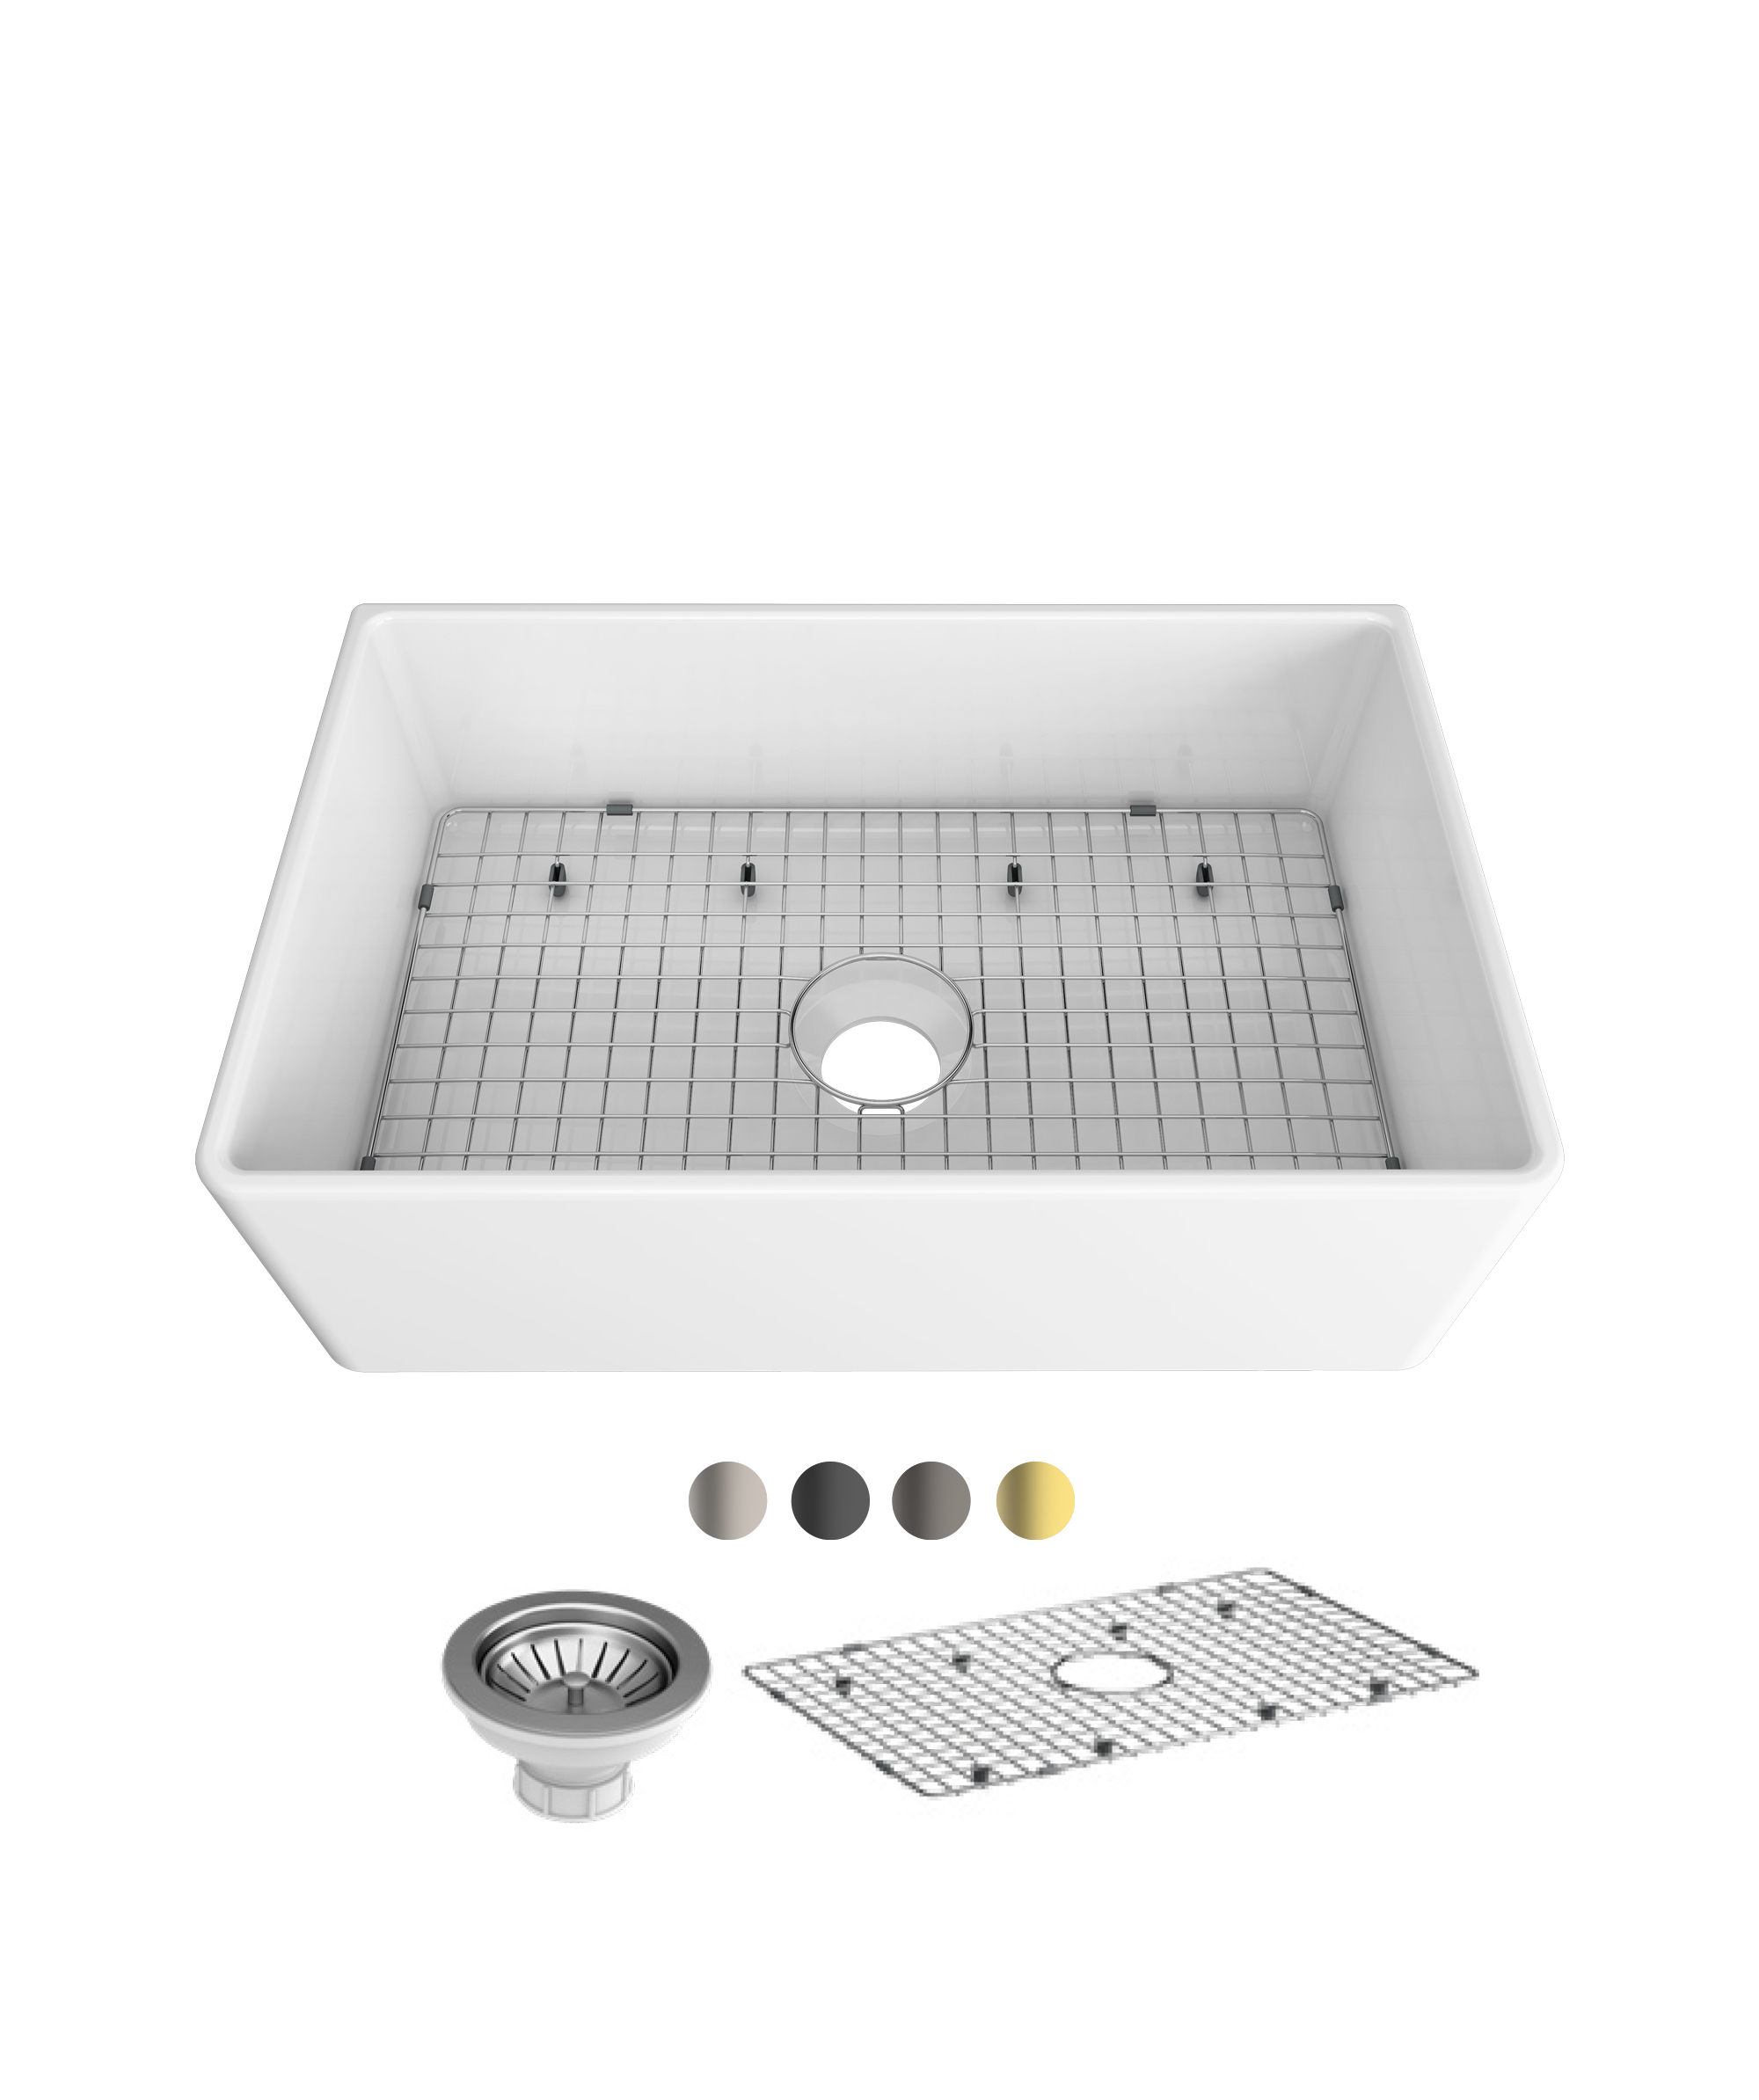 Odessa 761 Apron Front fireclay ceramic sink + optional extras